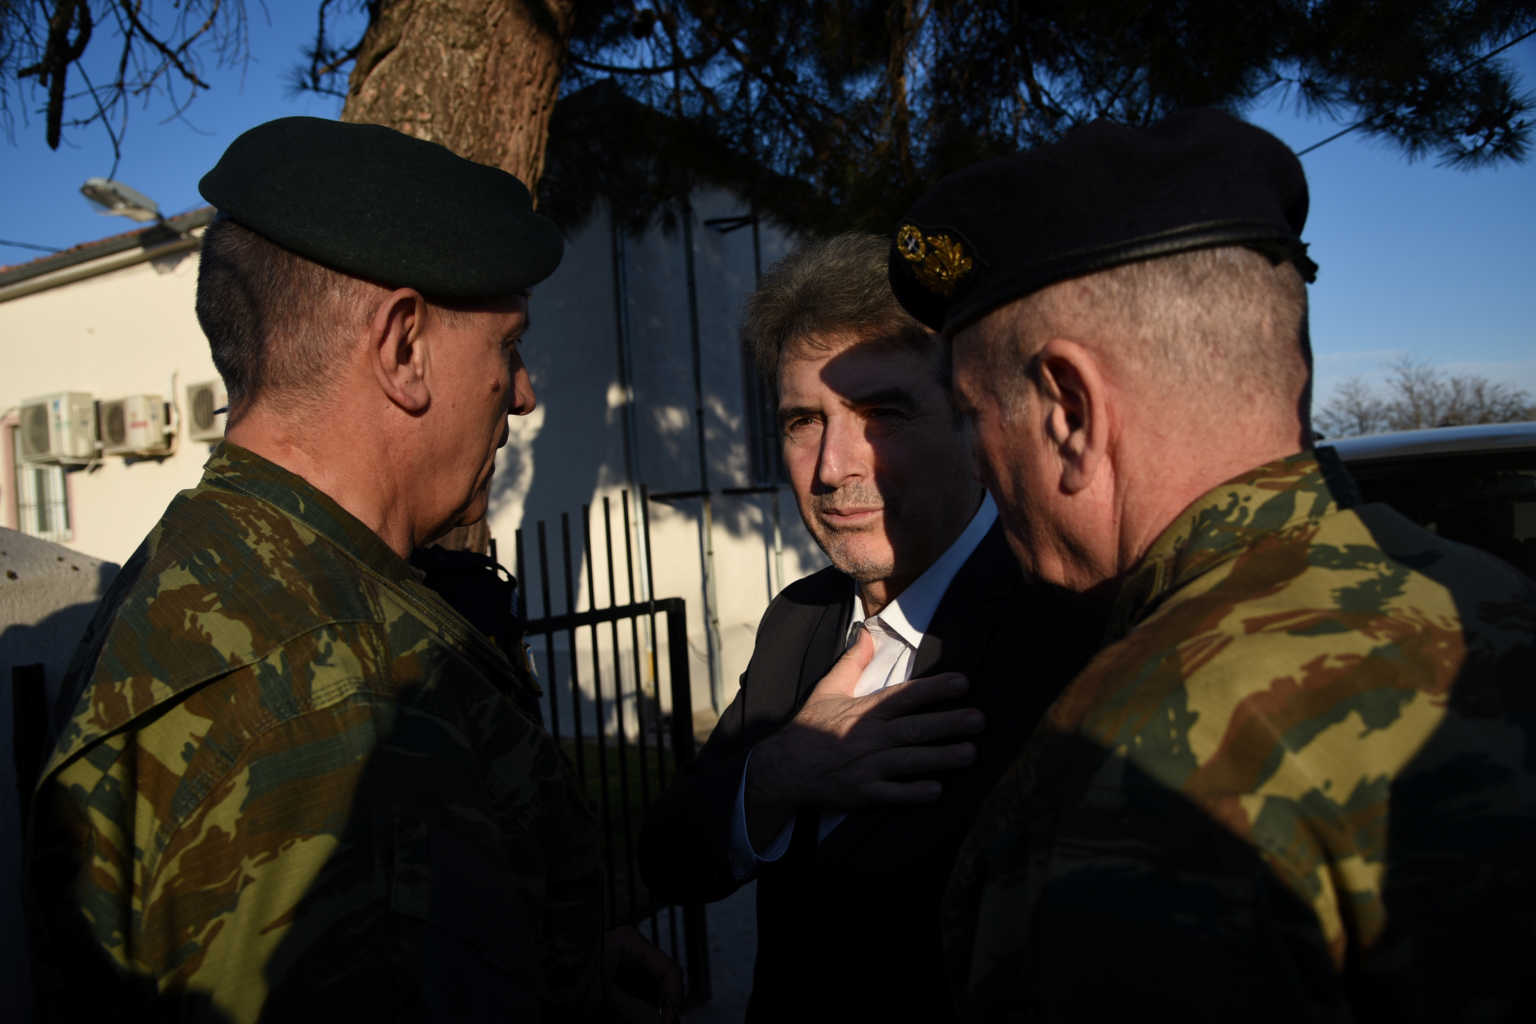 Citizen Protection Minister Mihalis Chrisohoidis speaks to military officers at the village of Nea Vyssa, in the region of Evros, Greece, February 28, 2020. REUTERS/Alexandros Avramidis